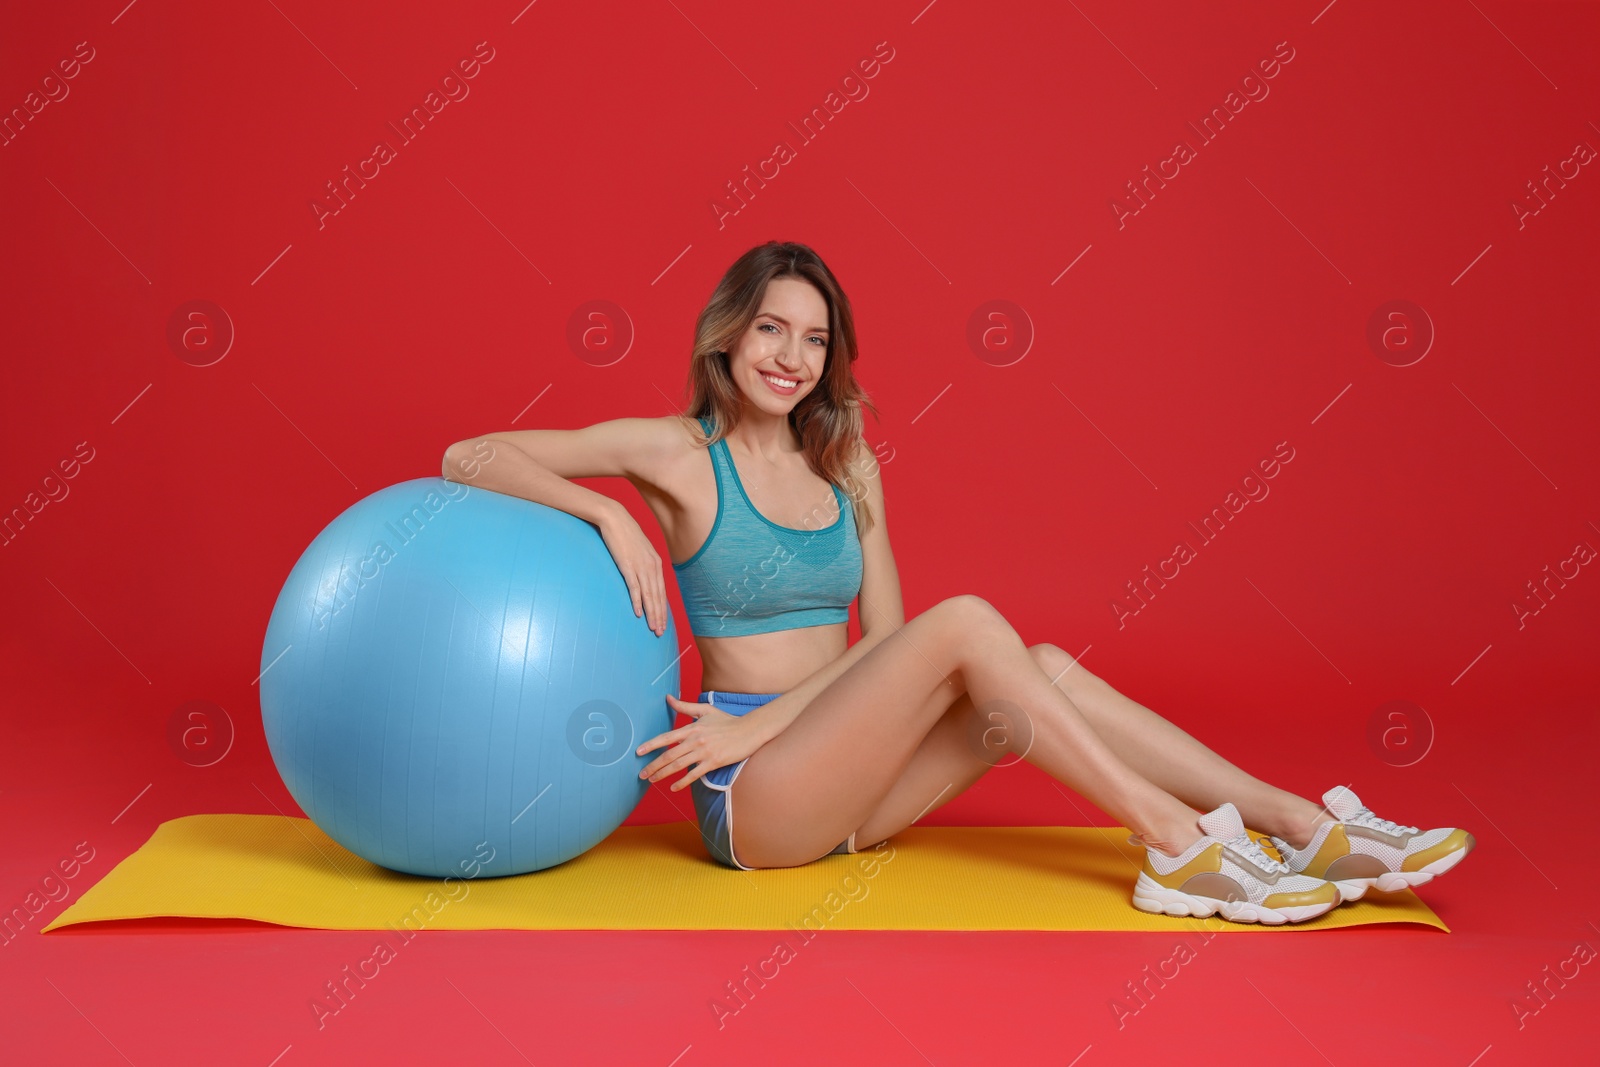 Photo of Beautiful woman sitting on yoga mat near fitness ball against red background